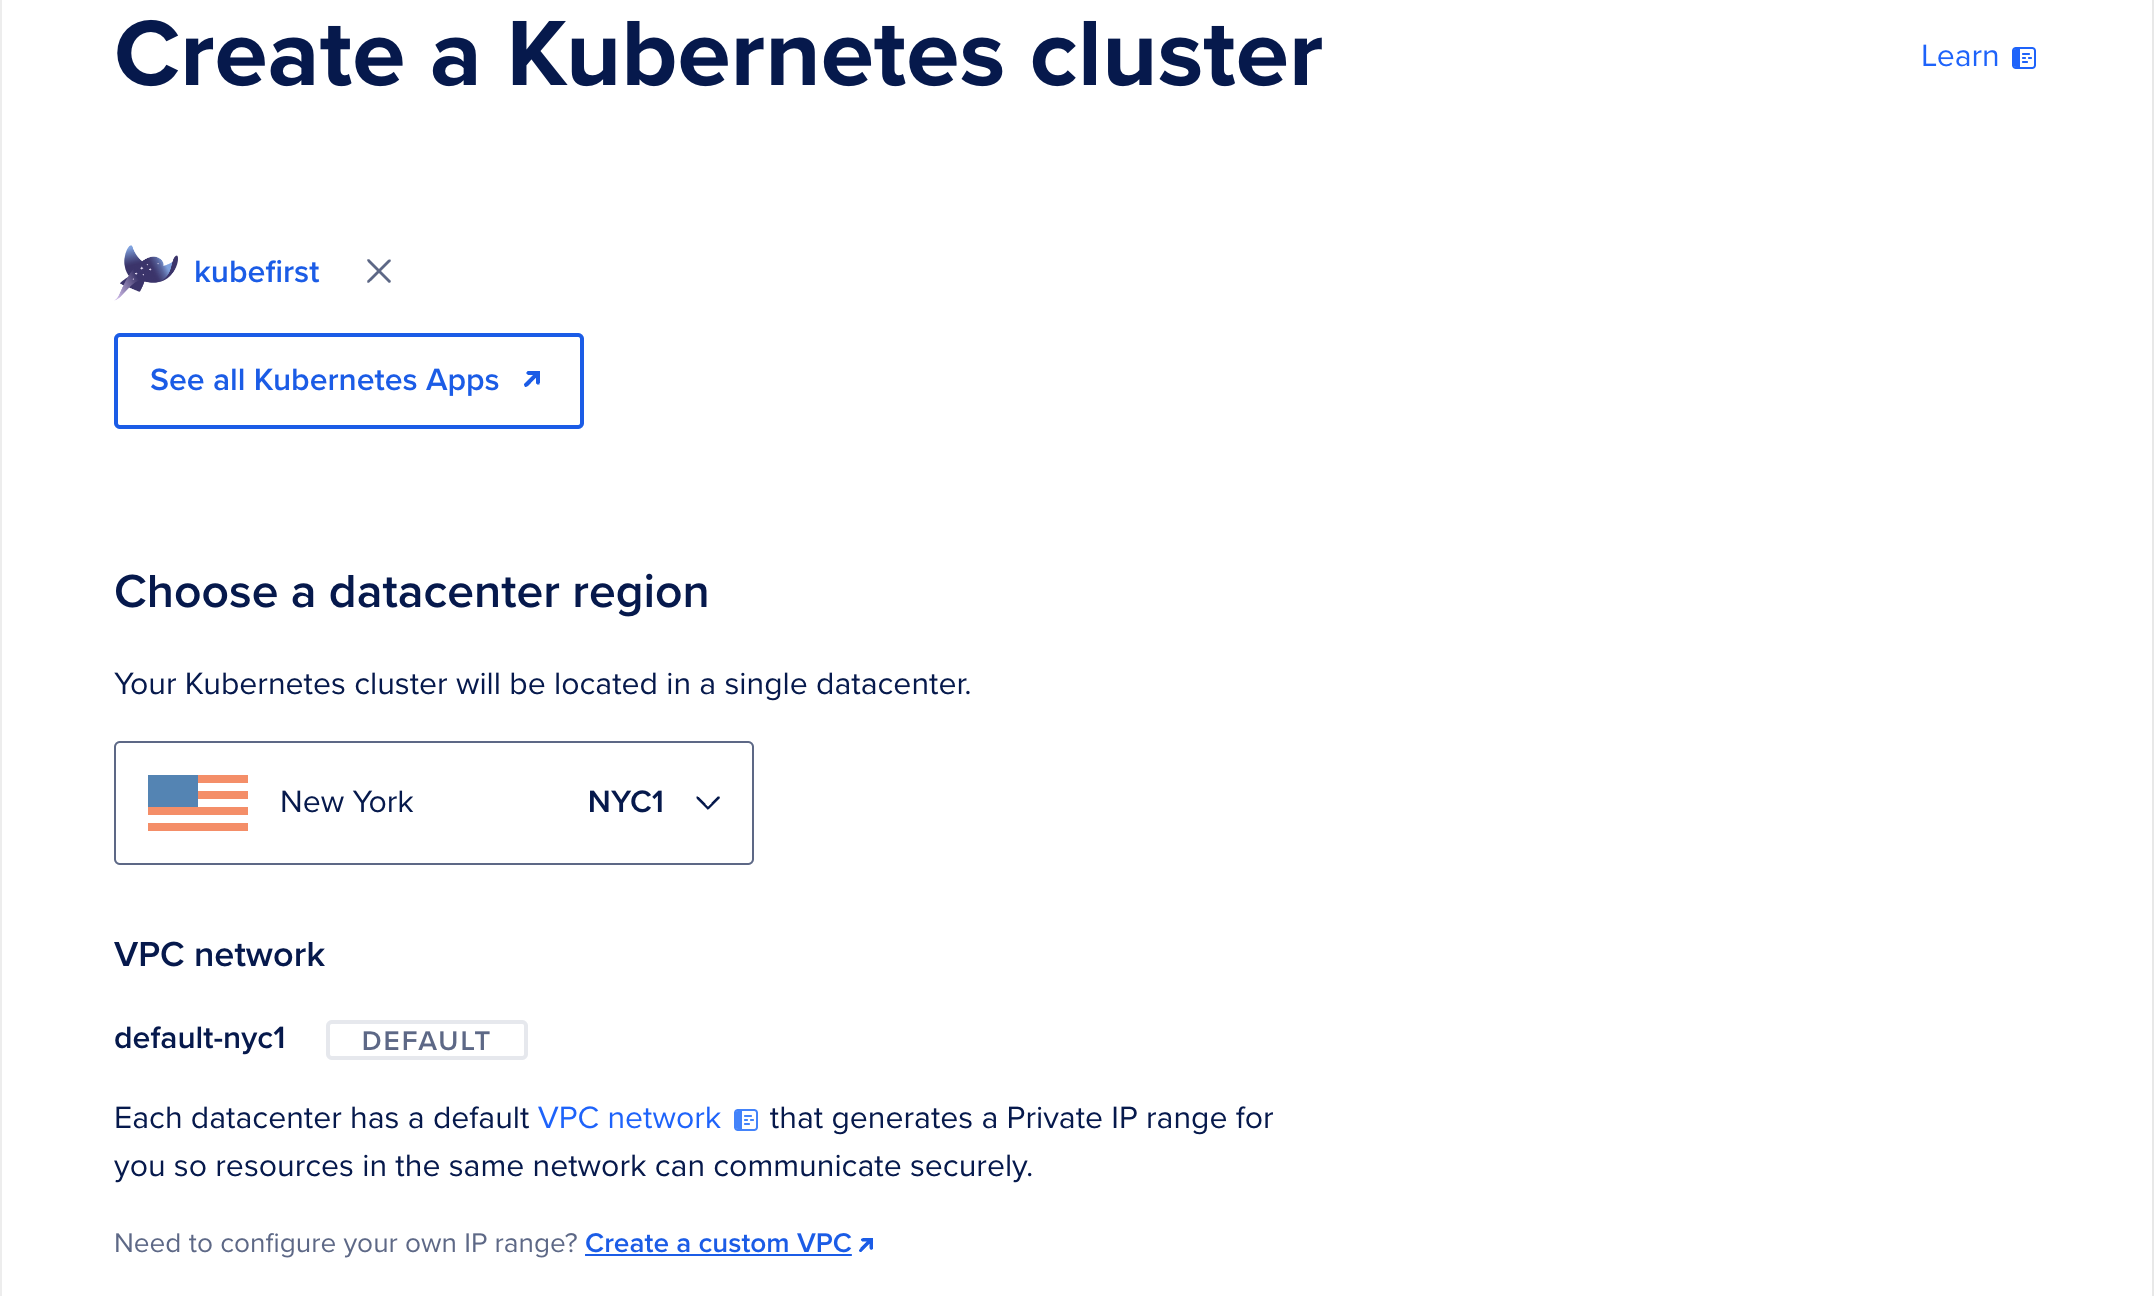 DigitalOcean Kubernetes cluster creation page first section with datacenter region and VPC network selection.